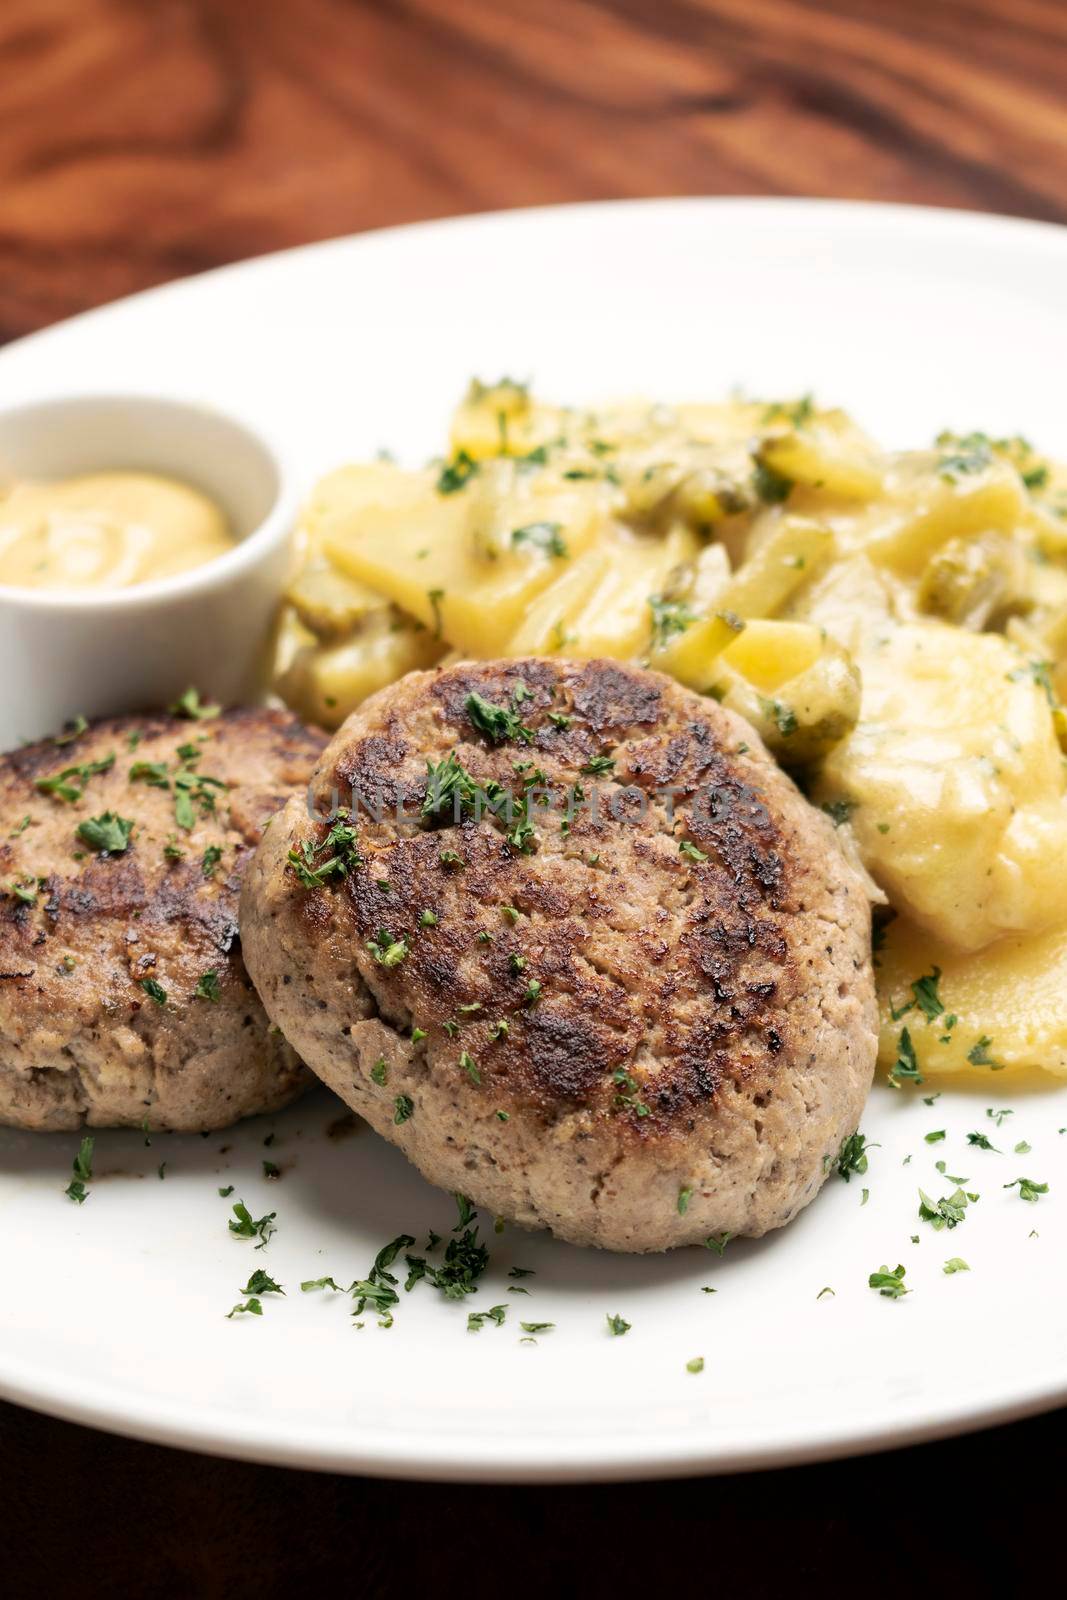 german frikadellen meatballs with creamy onion fried potatoes and mustard sauce on wood table background